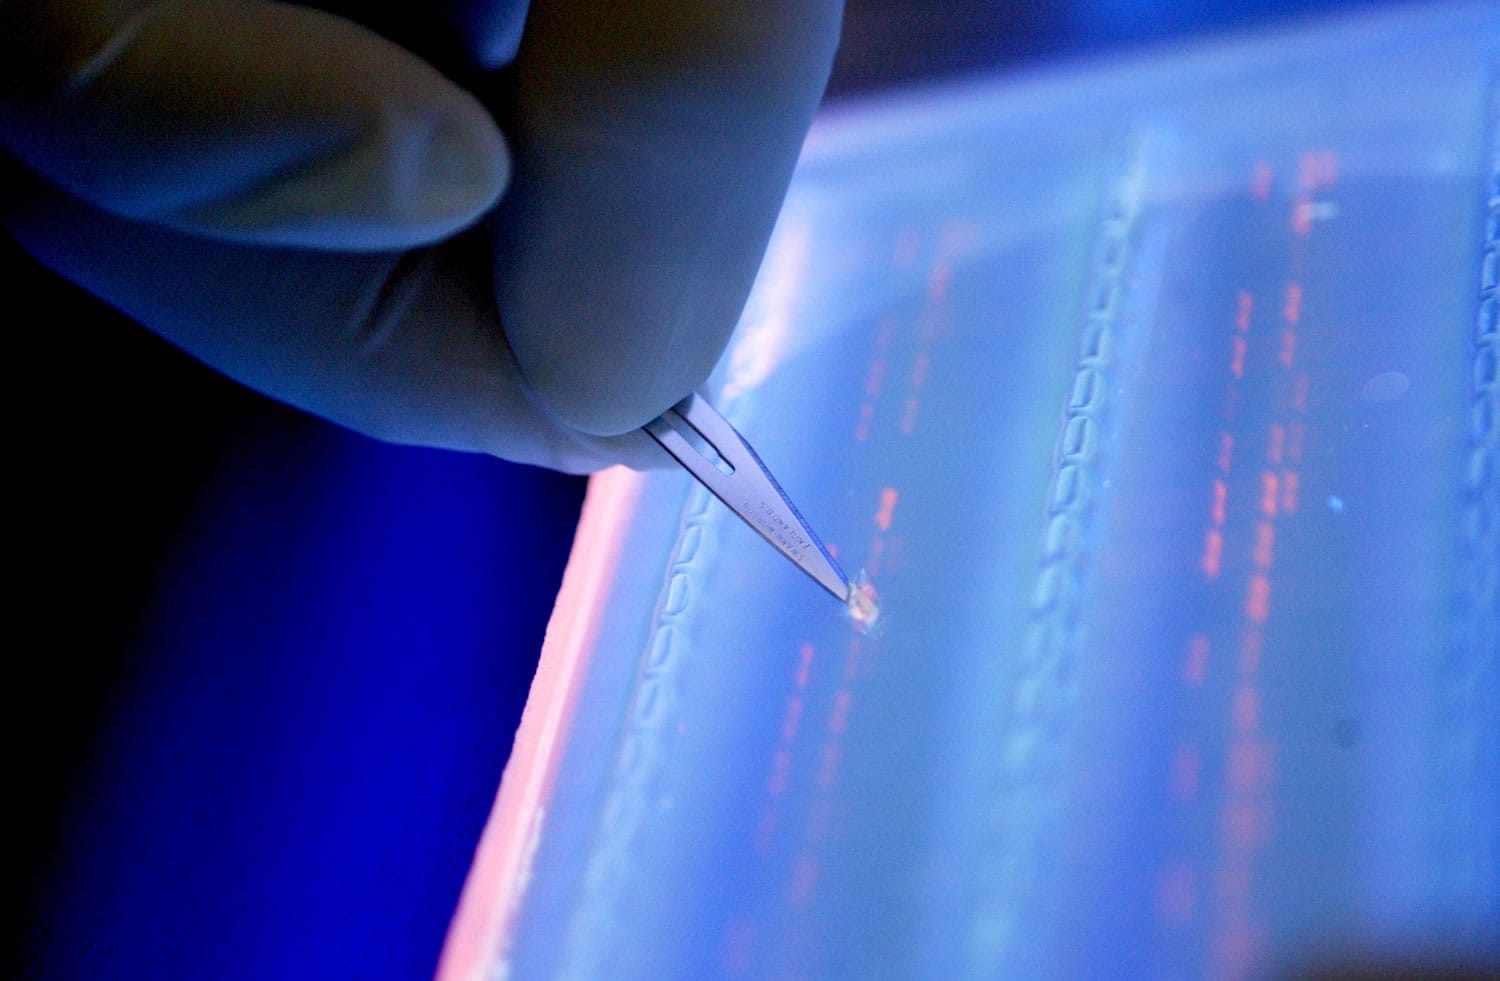 A lab officer cuts a DNA fragment under UV light from an agarose gel for DNA sequencing as part of research to determine genetic mutation in a blood cancer patient. New research shows a sharp escalation in the weapons race against cancer, with several high-tech approaches long dreamed of but not possible or successful until now.